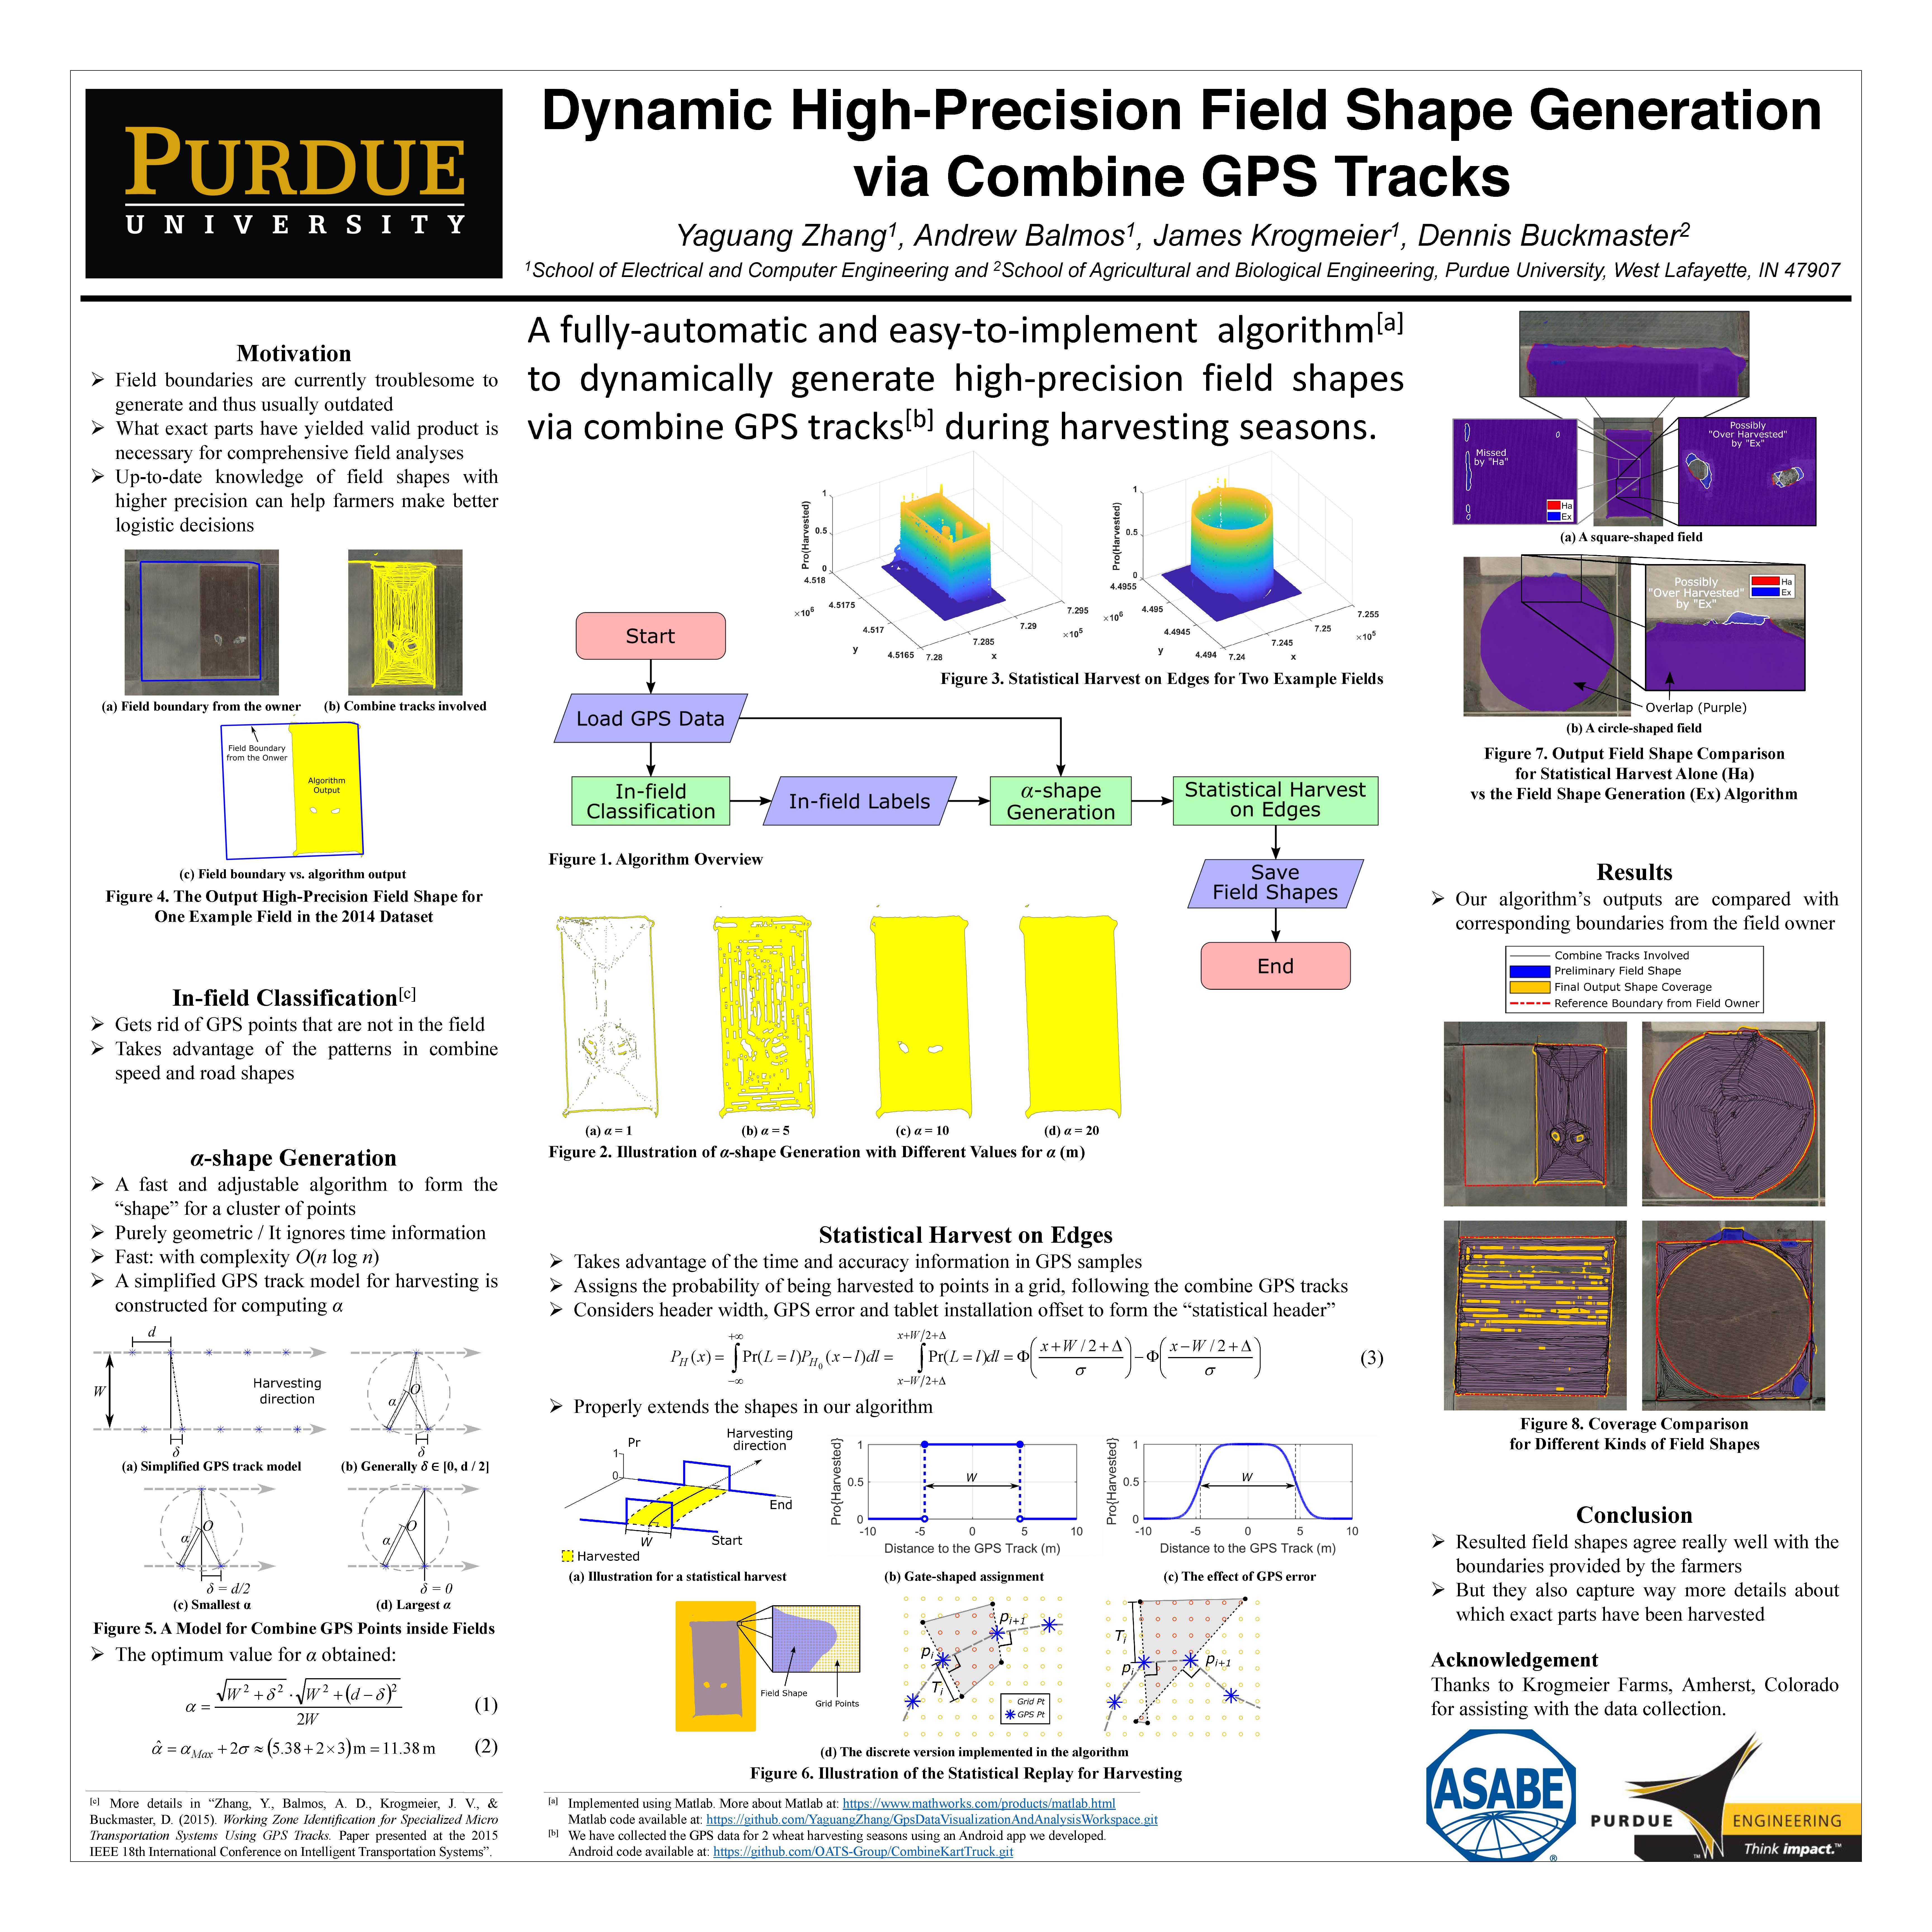 Poster Image for Dynamic High-Precision Field Shape Generation via Combine GPS Tracks